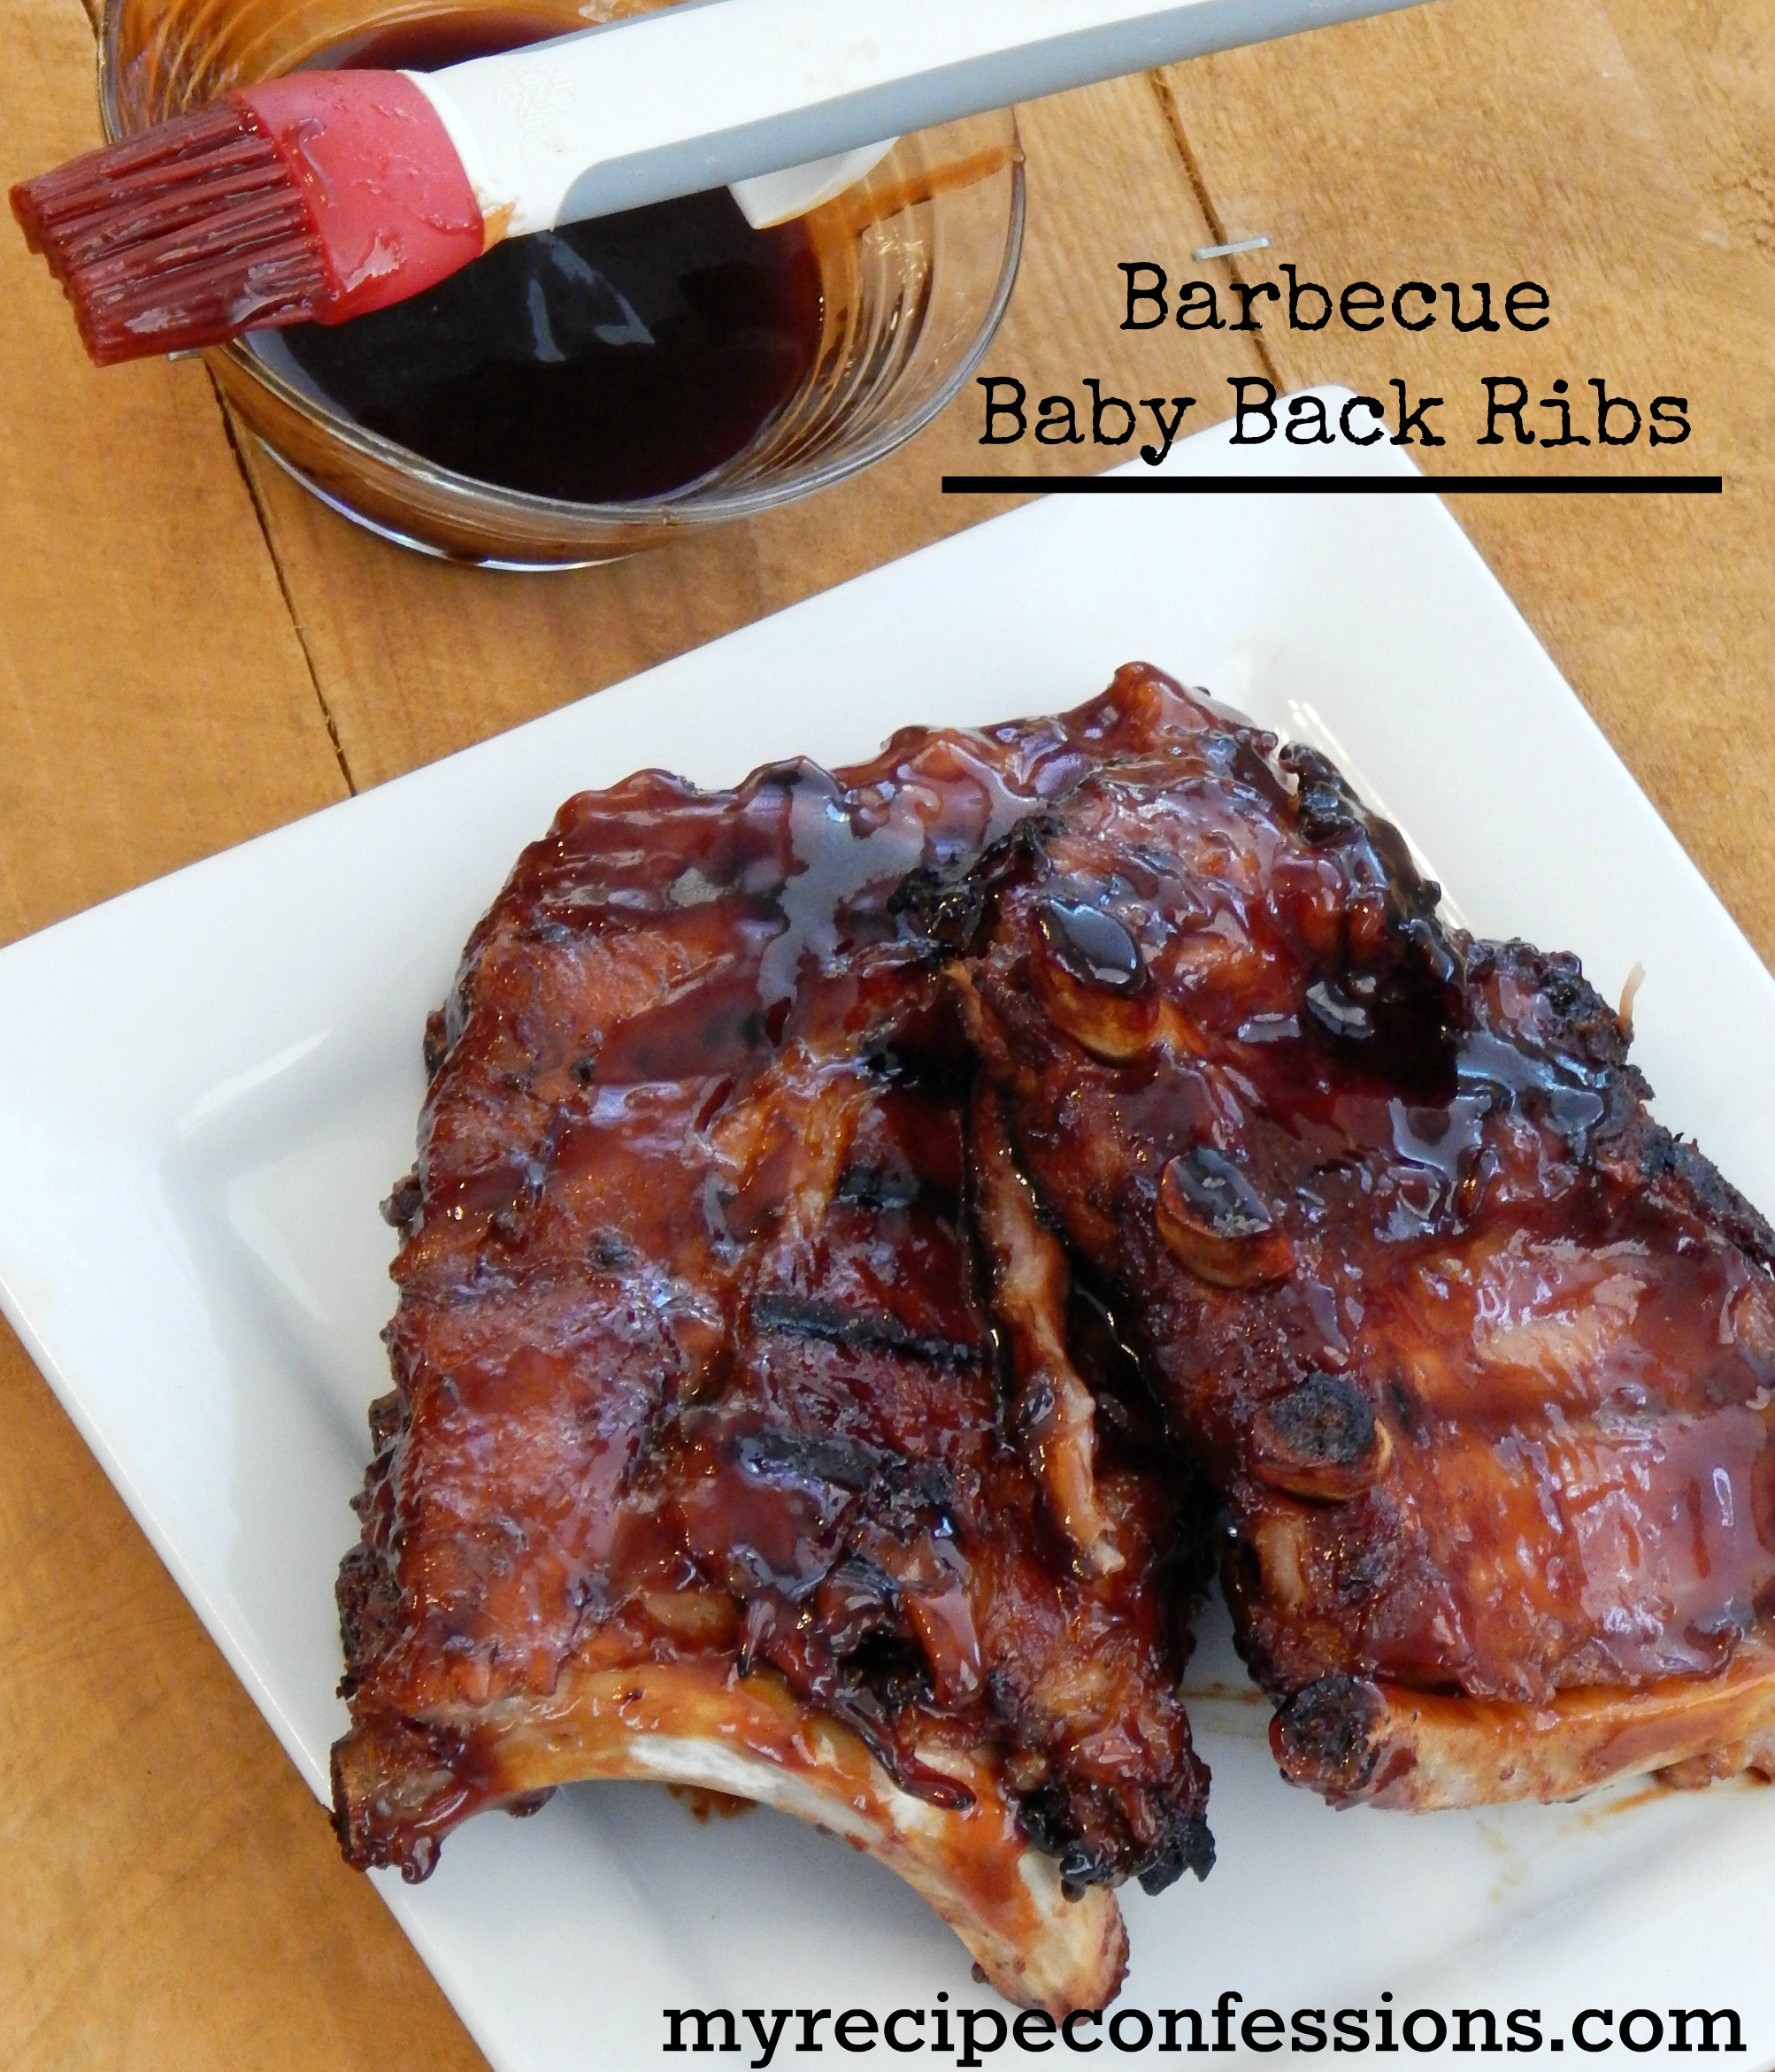 Barbecue Baby Back Ribs Recipes
 Barbecue Baby Back Ribs My Recipe Confessions